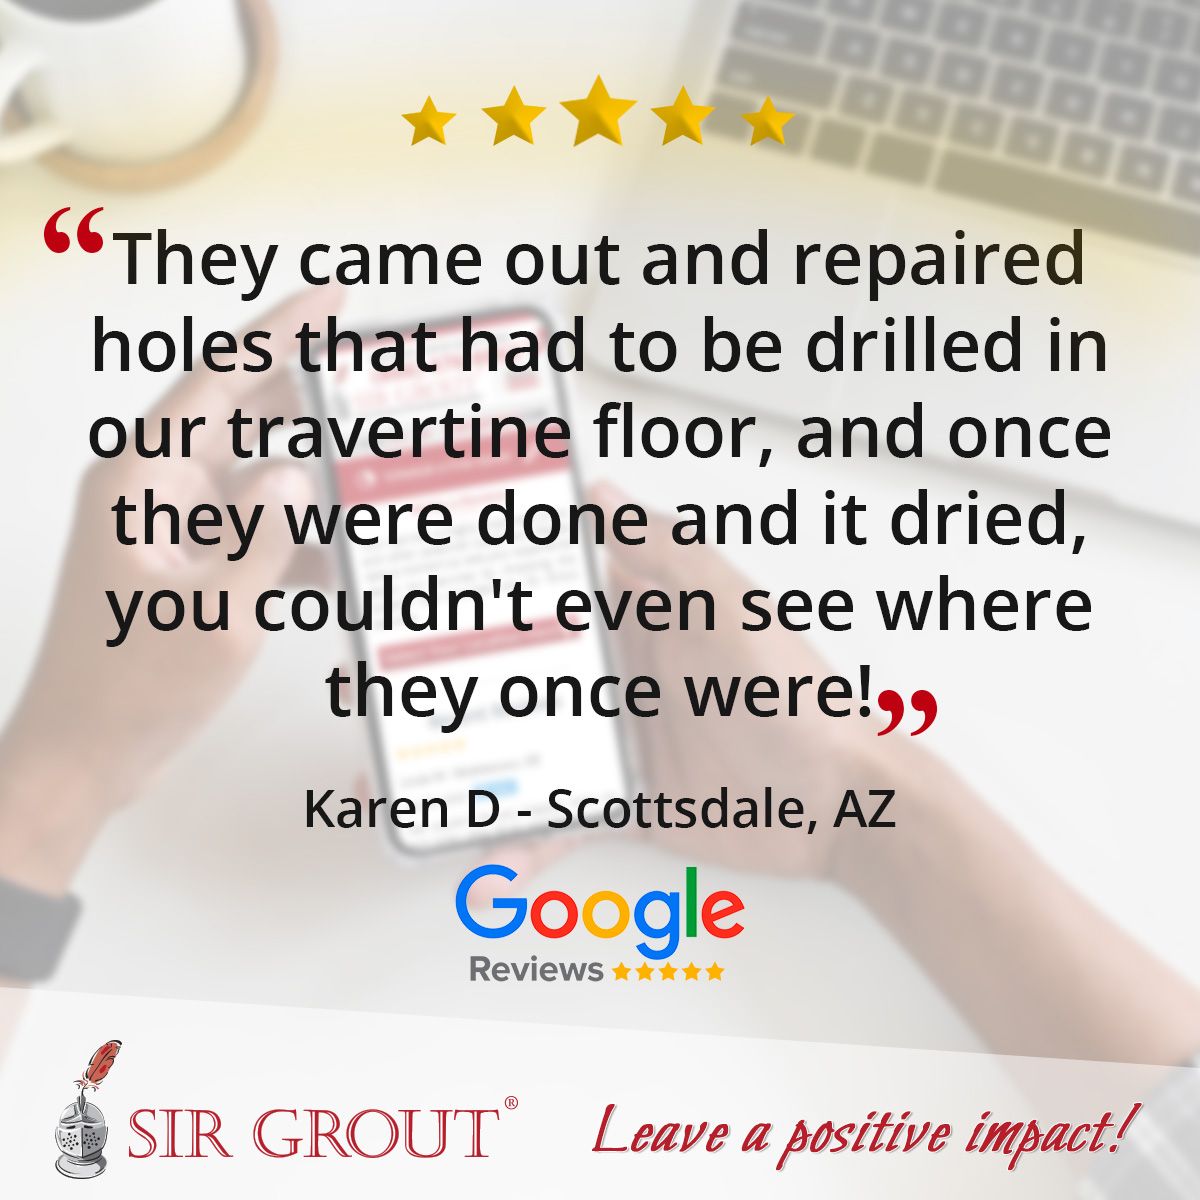 They came out and repaired holes that had to be drilled in our travertine floor, and once they were done and it dried, you couldn't even see where they once were!